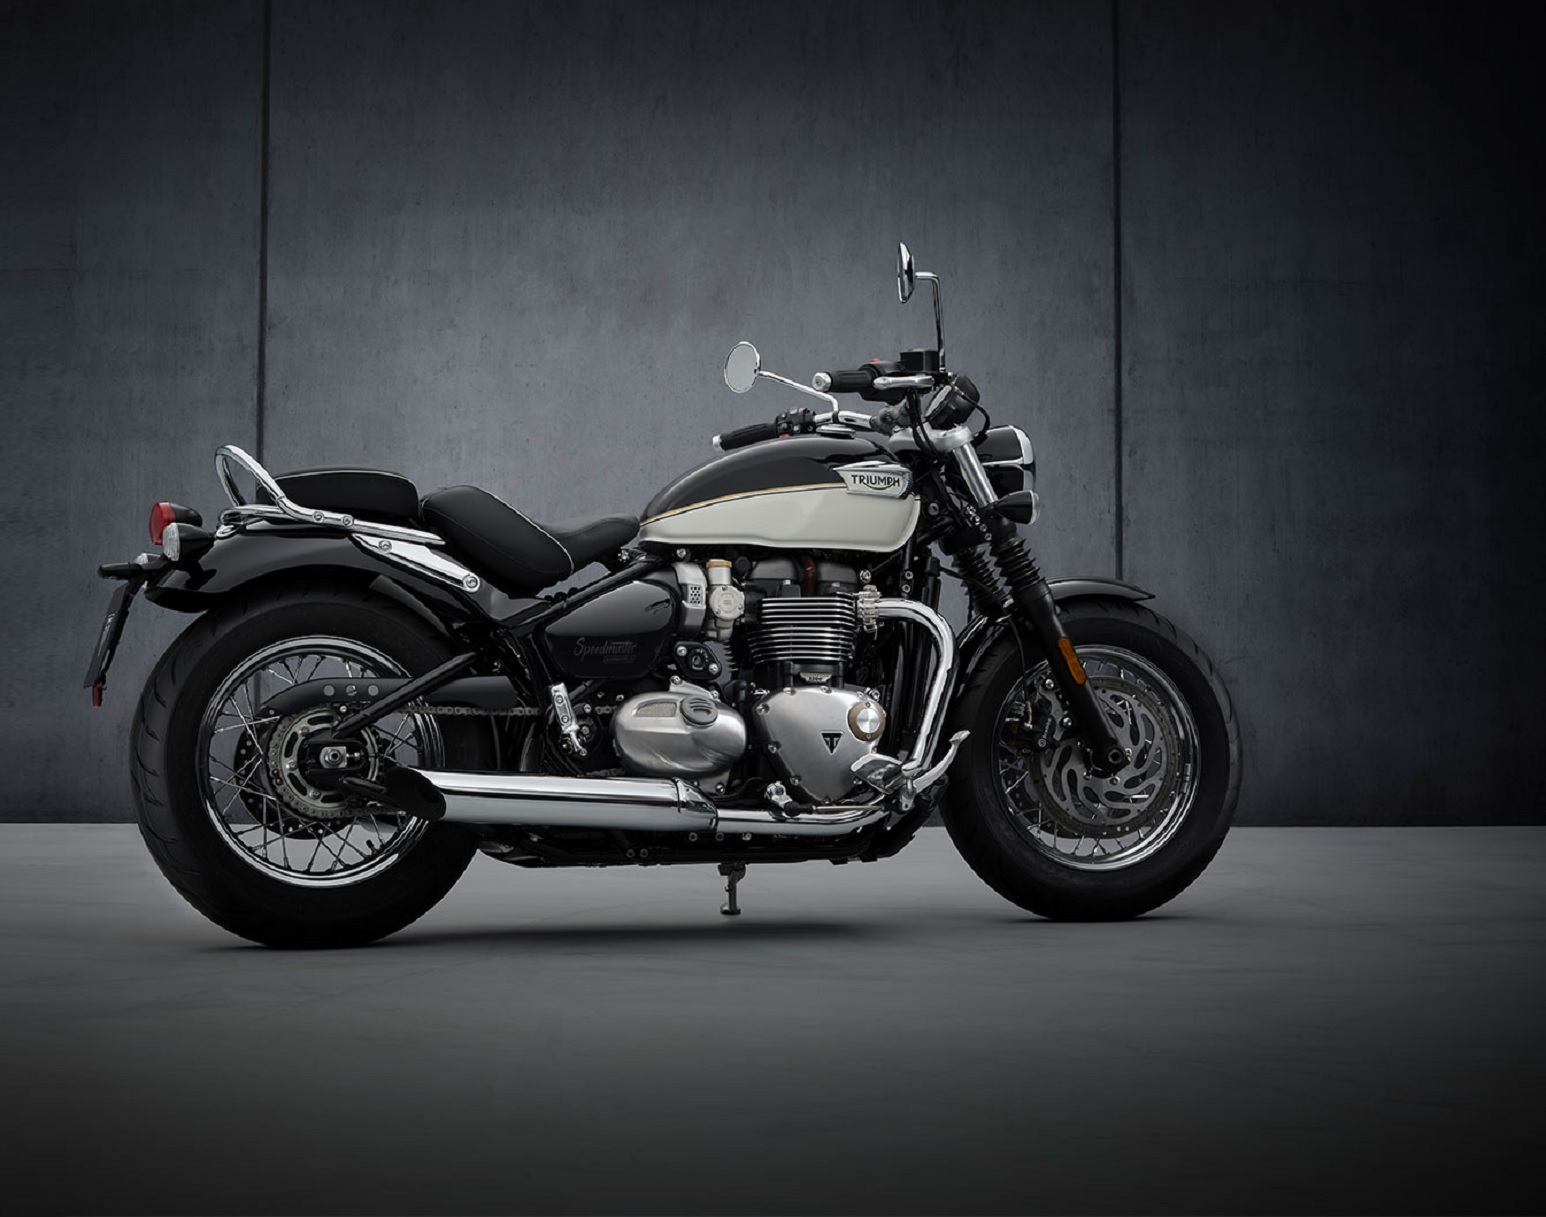 The 2022 Triumph Bonneville Speedmaster The Harley With A British Accent